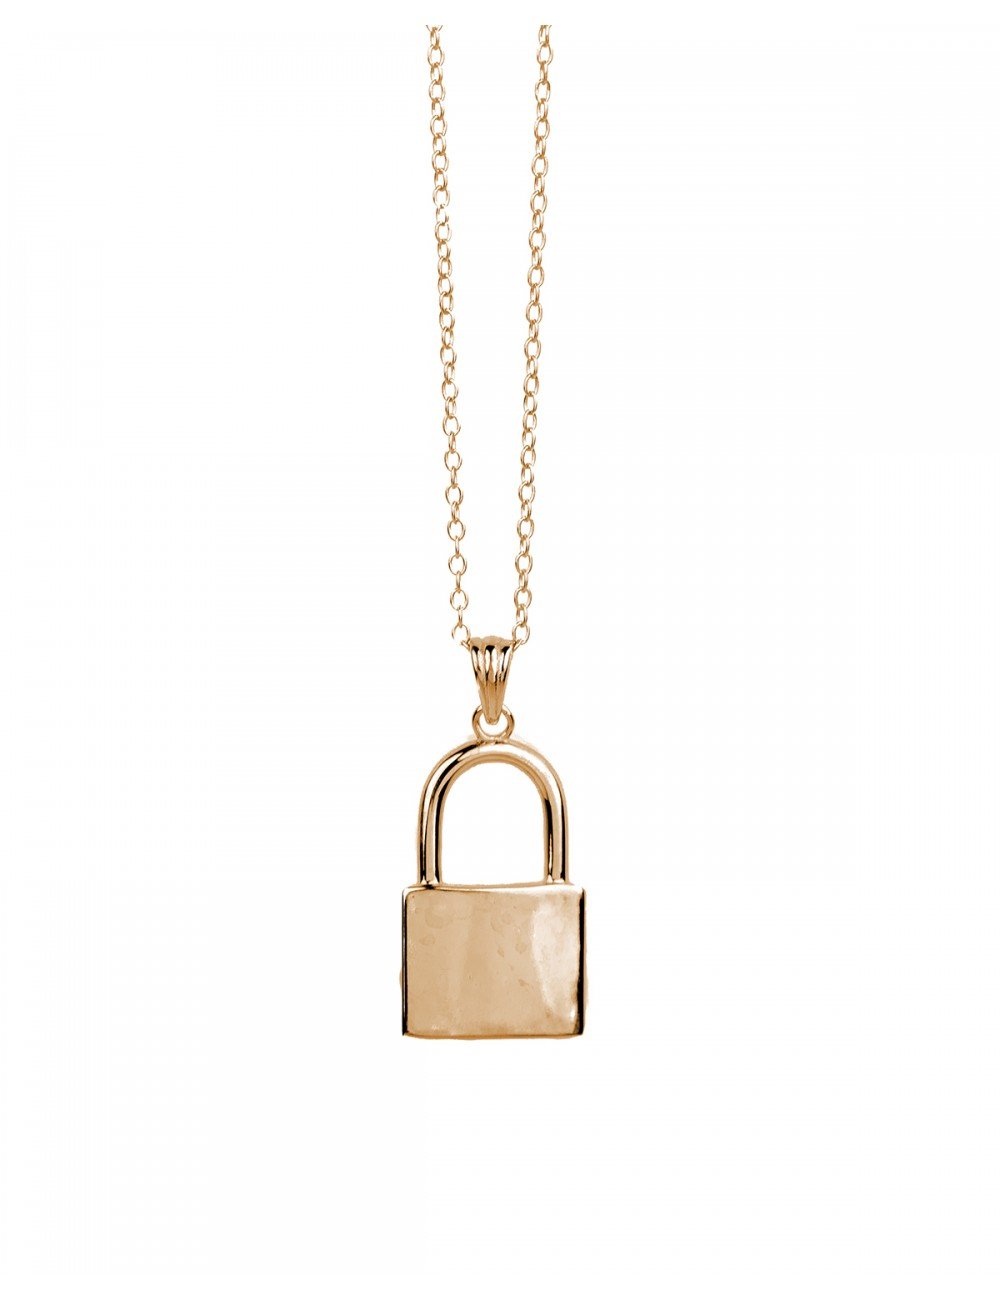 Lock Pendant Necklace - Necklaces Jewelry Collections